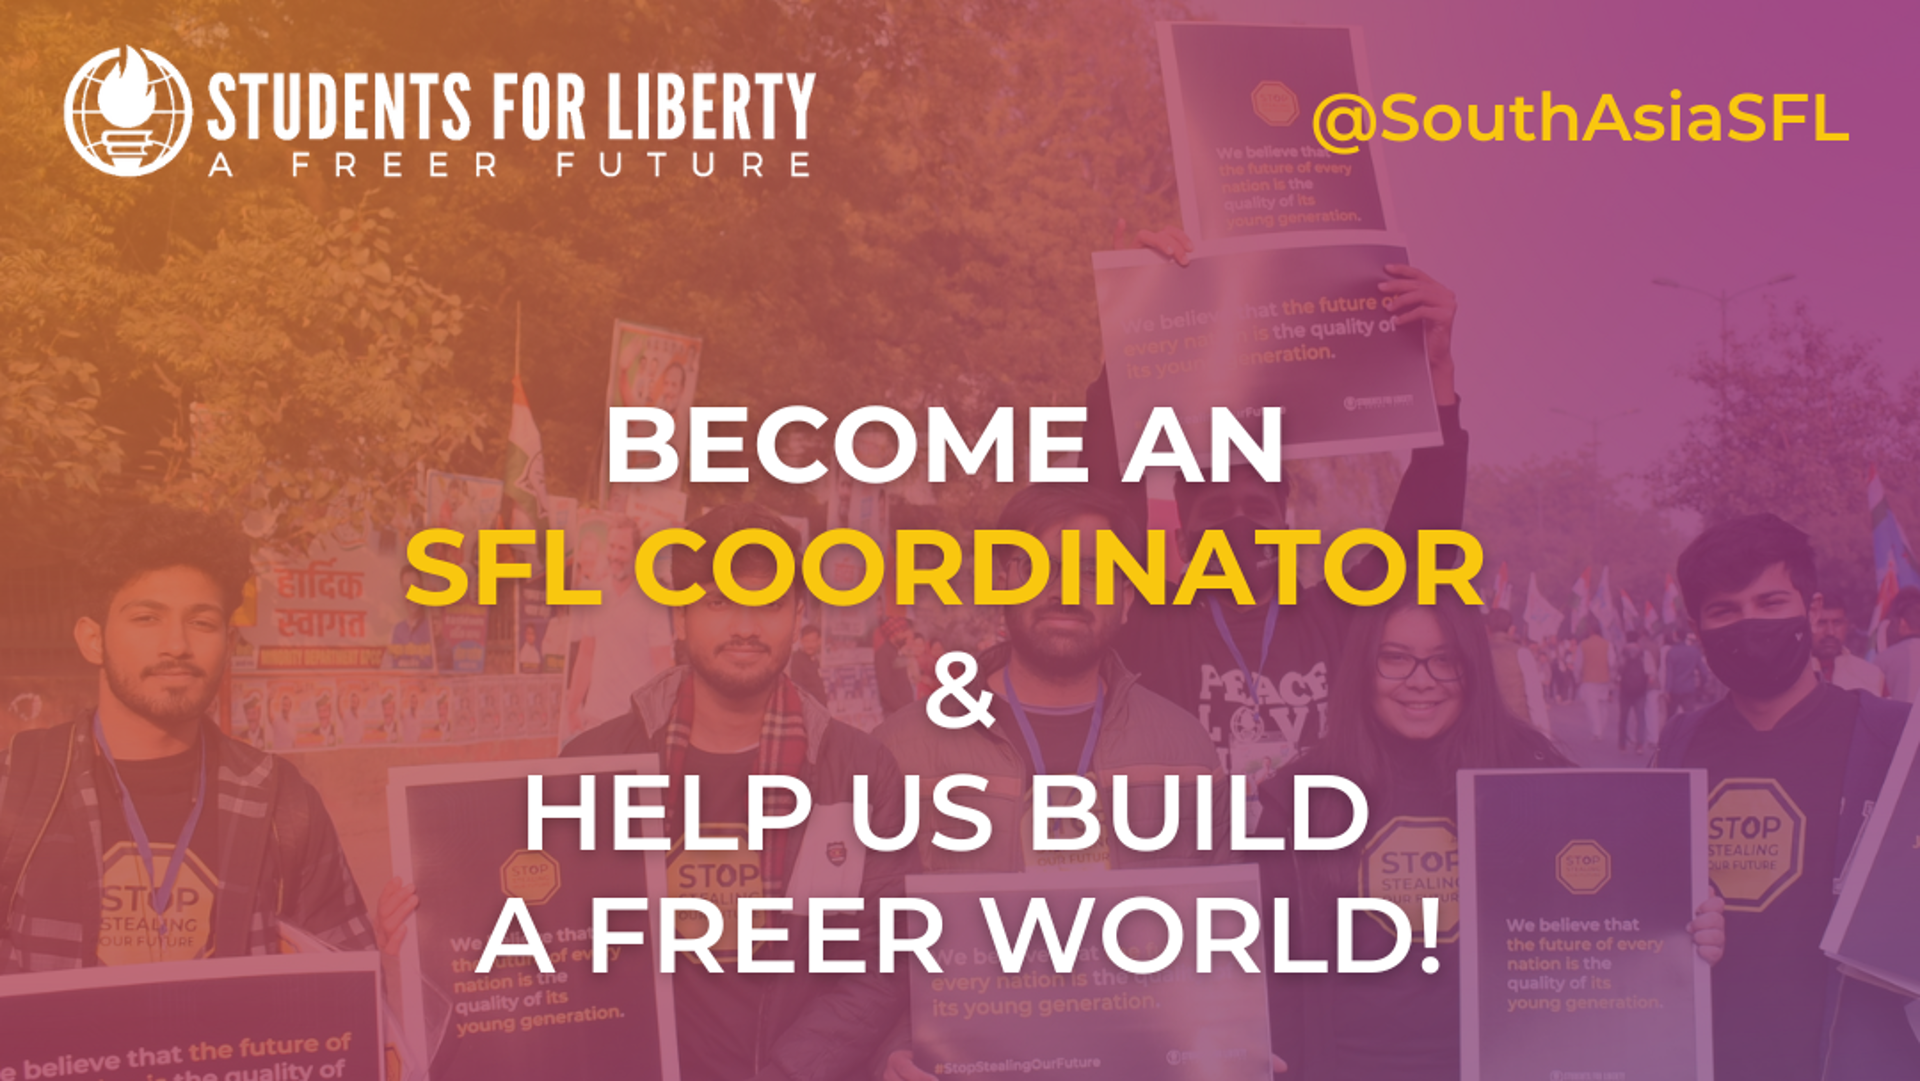 Students For Liberty South Asia is thrilled to announce the launch of applications for their highly anticipated Local Coordinator Program.